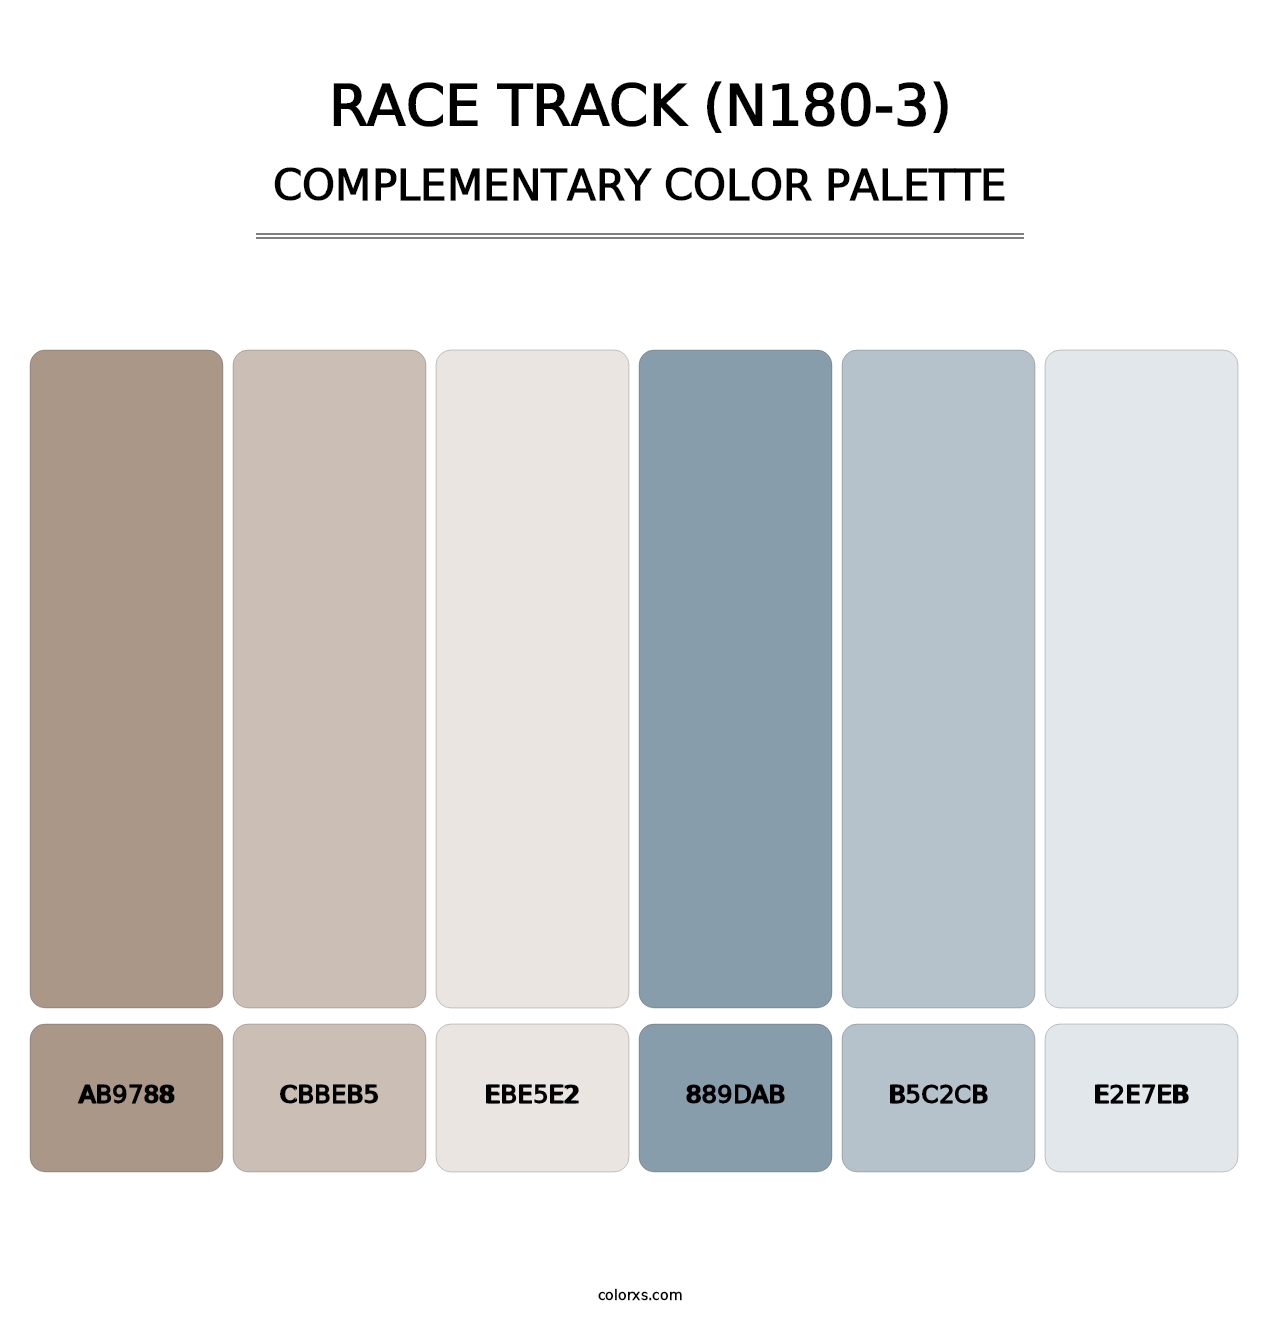 Race Track (N180-3) - Complementary Color Palette